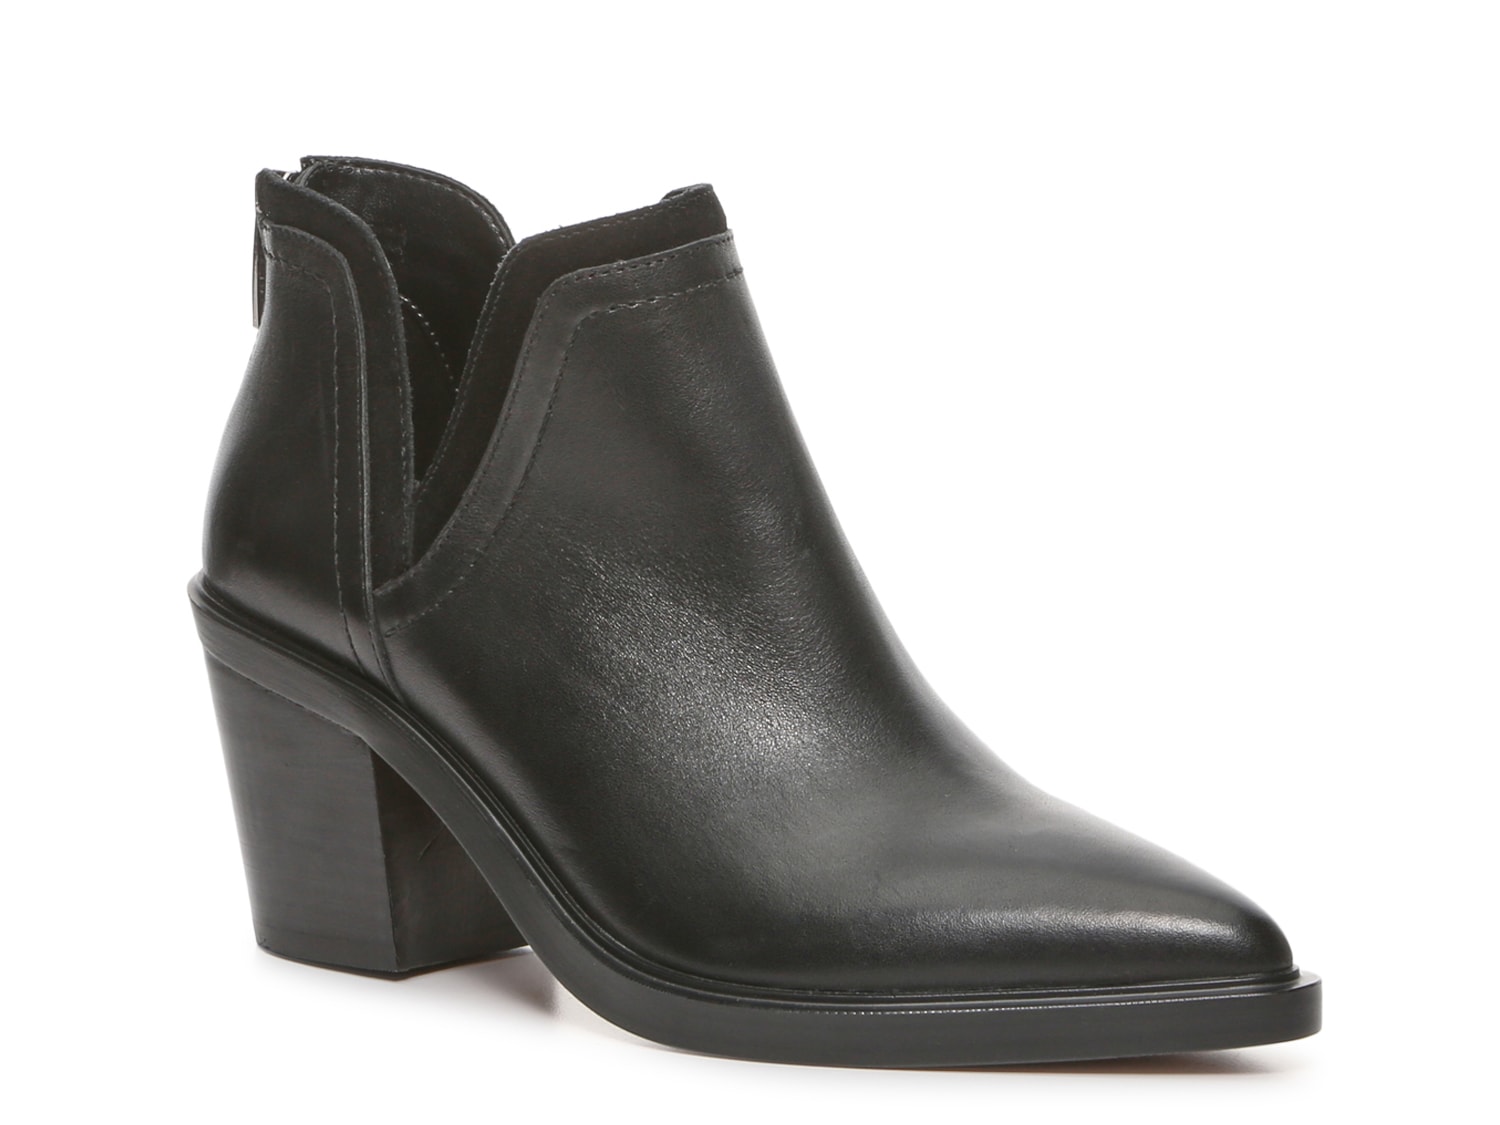 Vince Camuto Riggie Bootie - Free Shipping | DSW